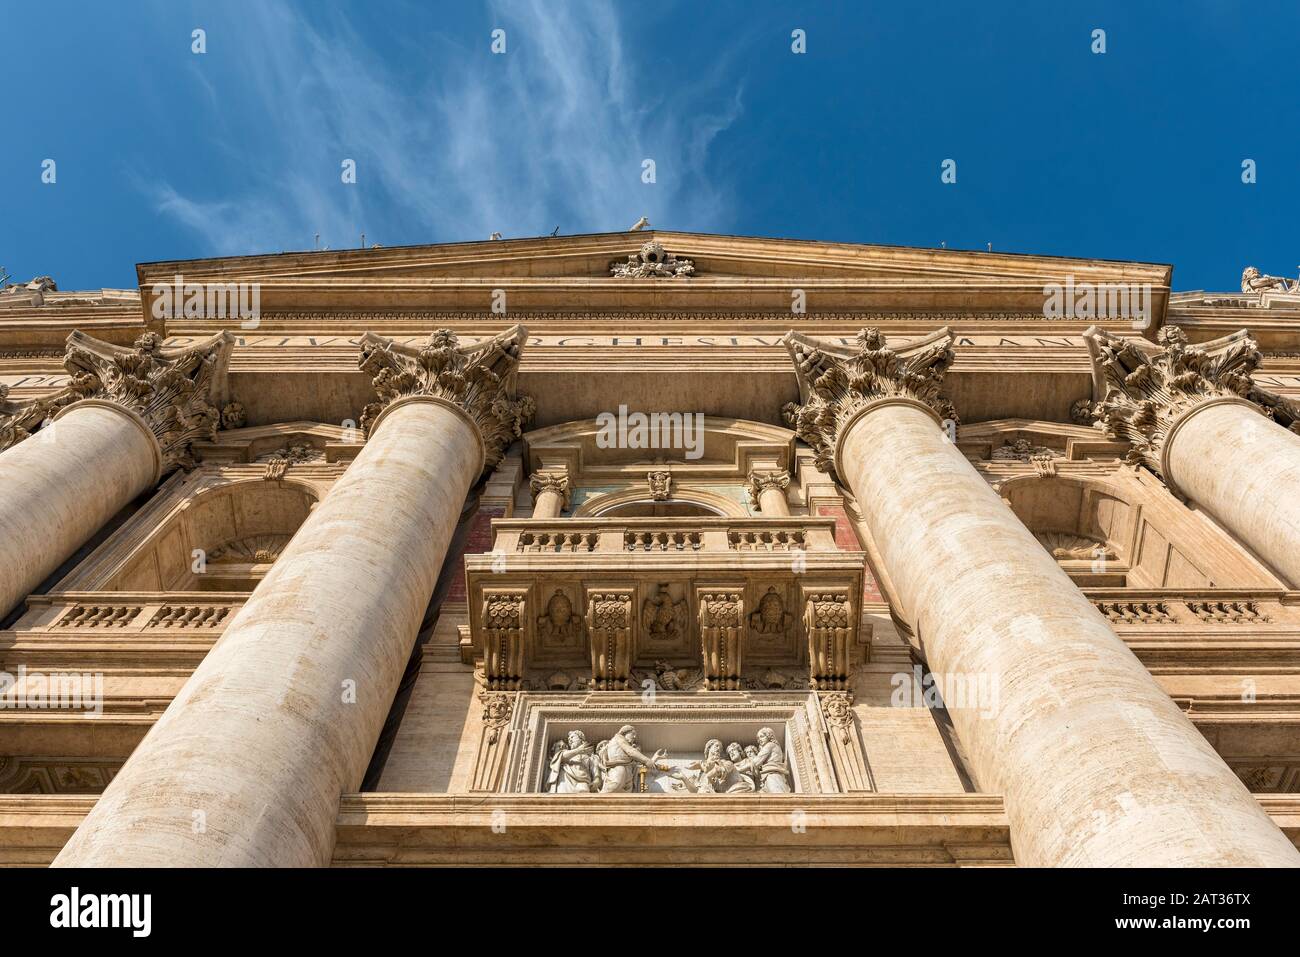 Low-angle view of Facade of St Peter's Basilica, Piazza San Pietro, Vatican, Rome, Italy Stock Photo